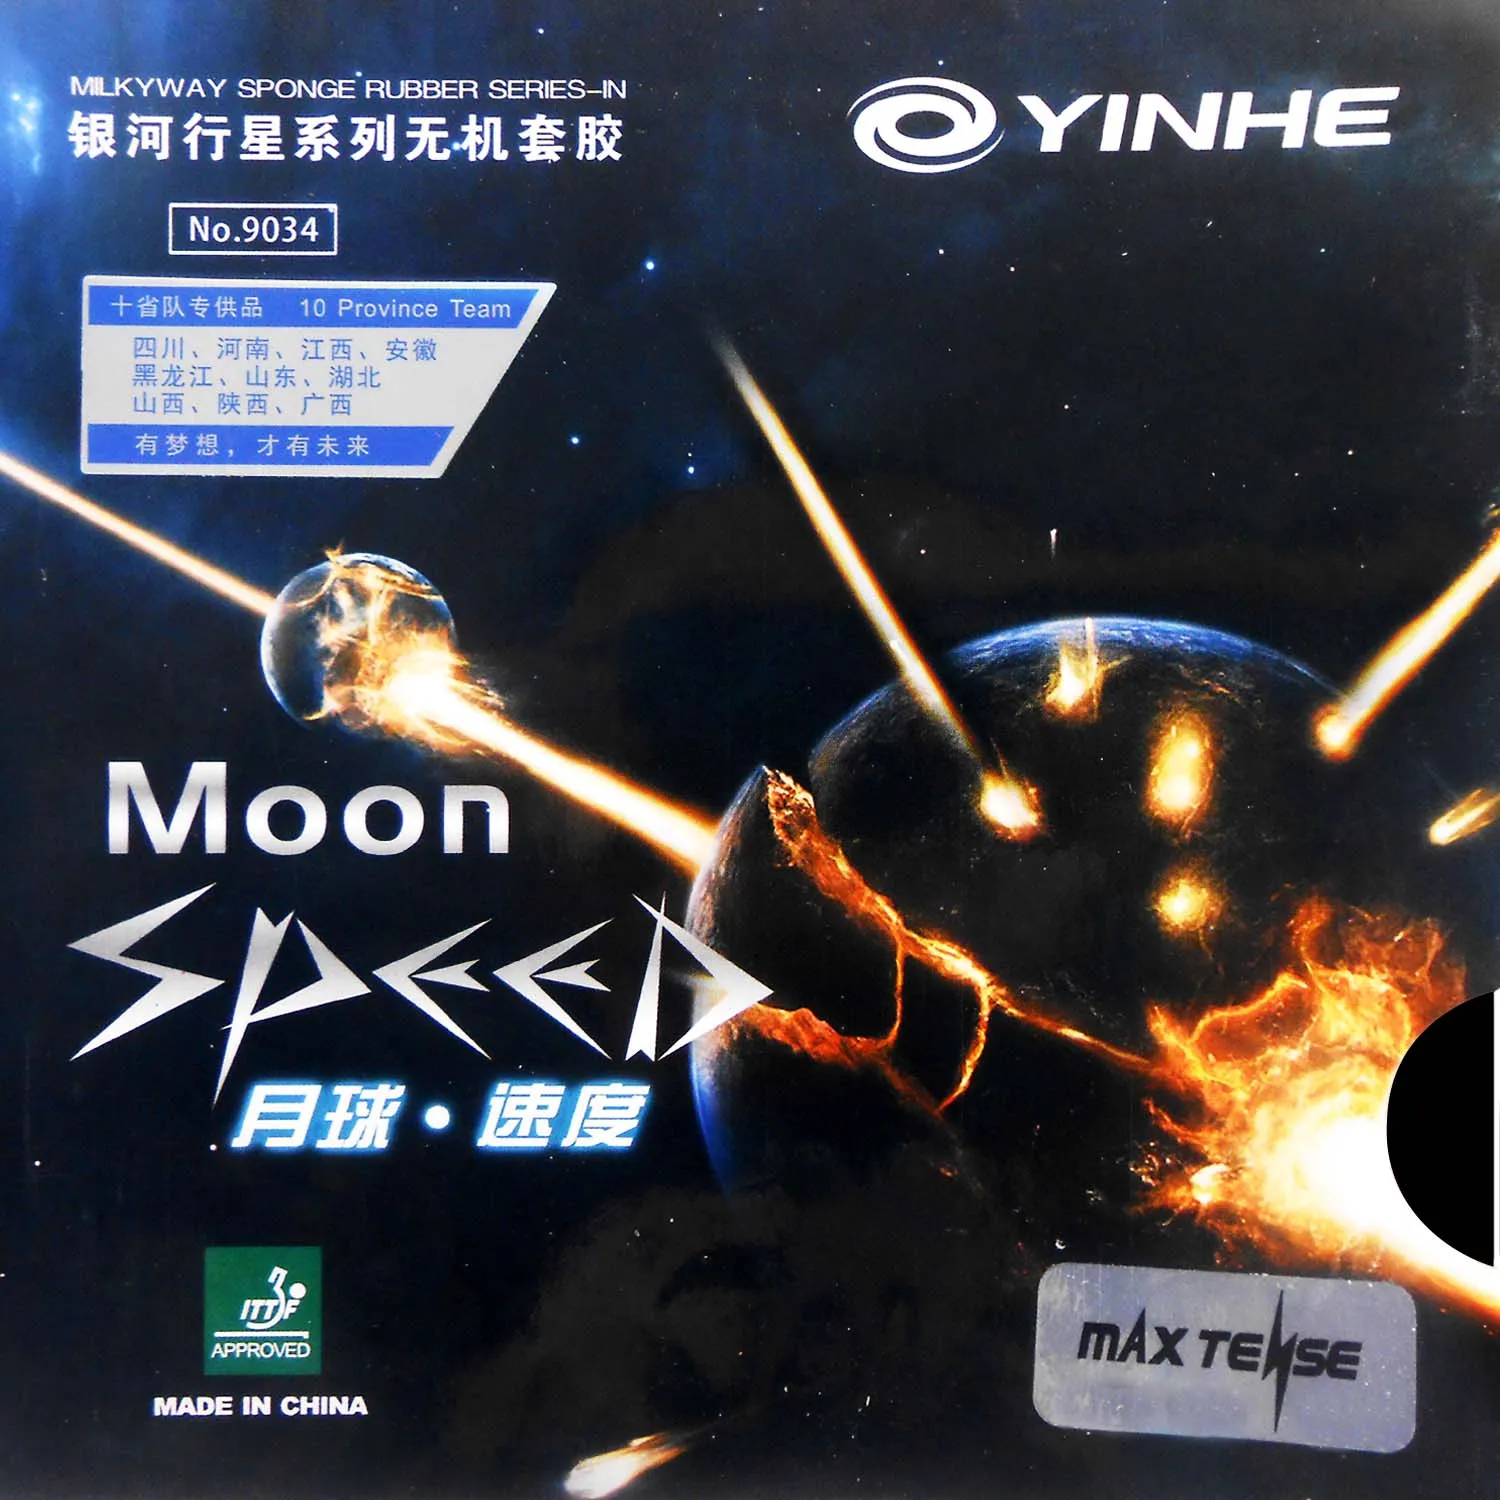 

Yinhe Moon Max Tense Factory Tuned Pips-In Table Tennis PingPong Rubber with Sponge